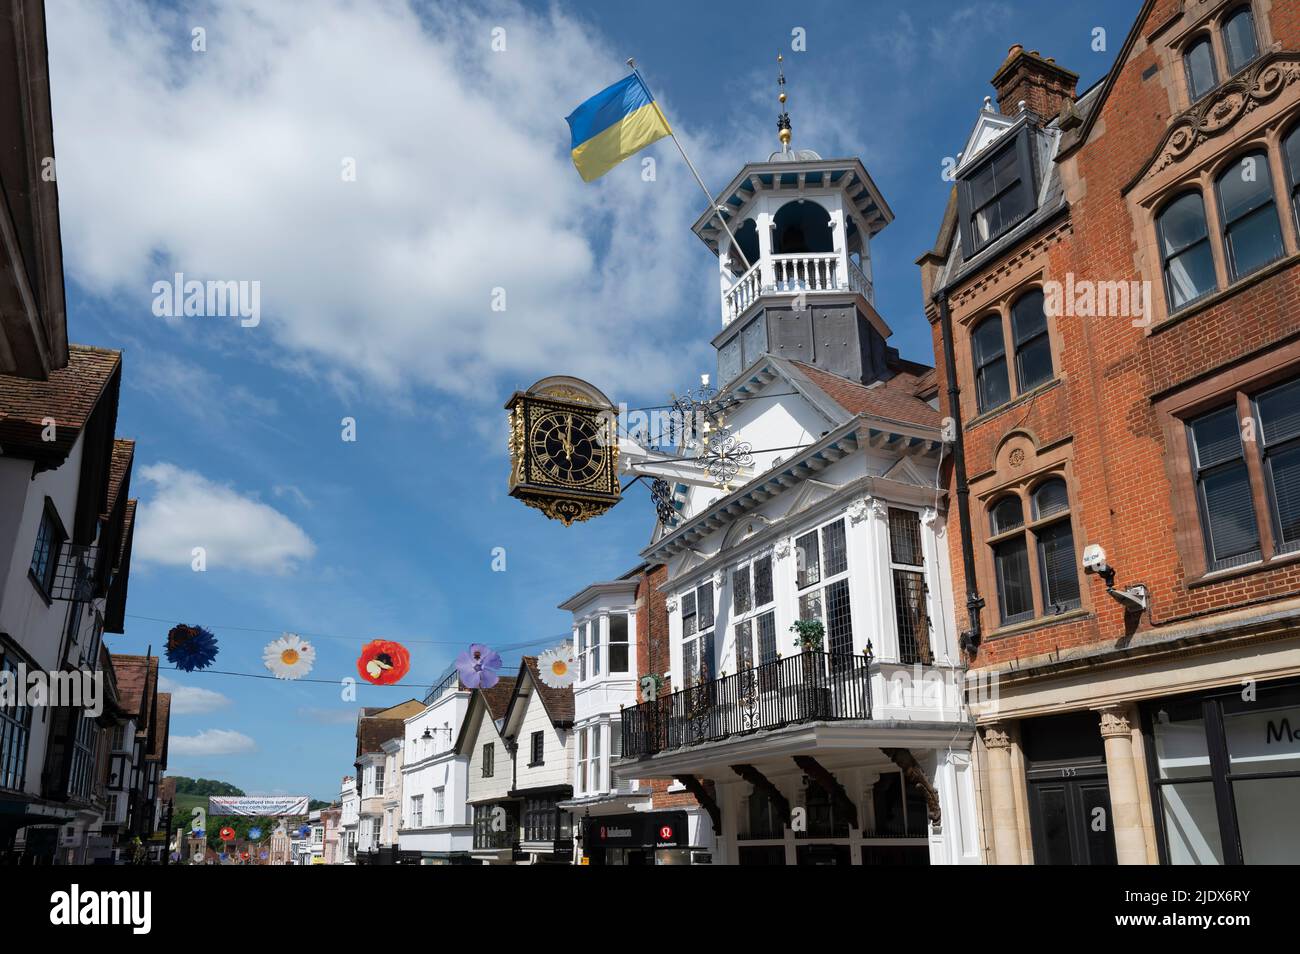 Guildford High Street with the Guildhall (16th Century Grade I listed) and John Aylsward's clock, Guildford, Surrey, England, UK Stock Photo